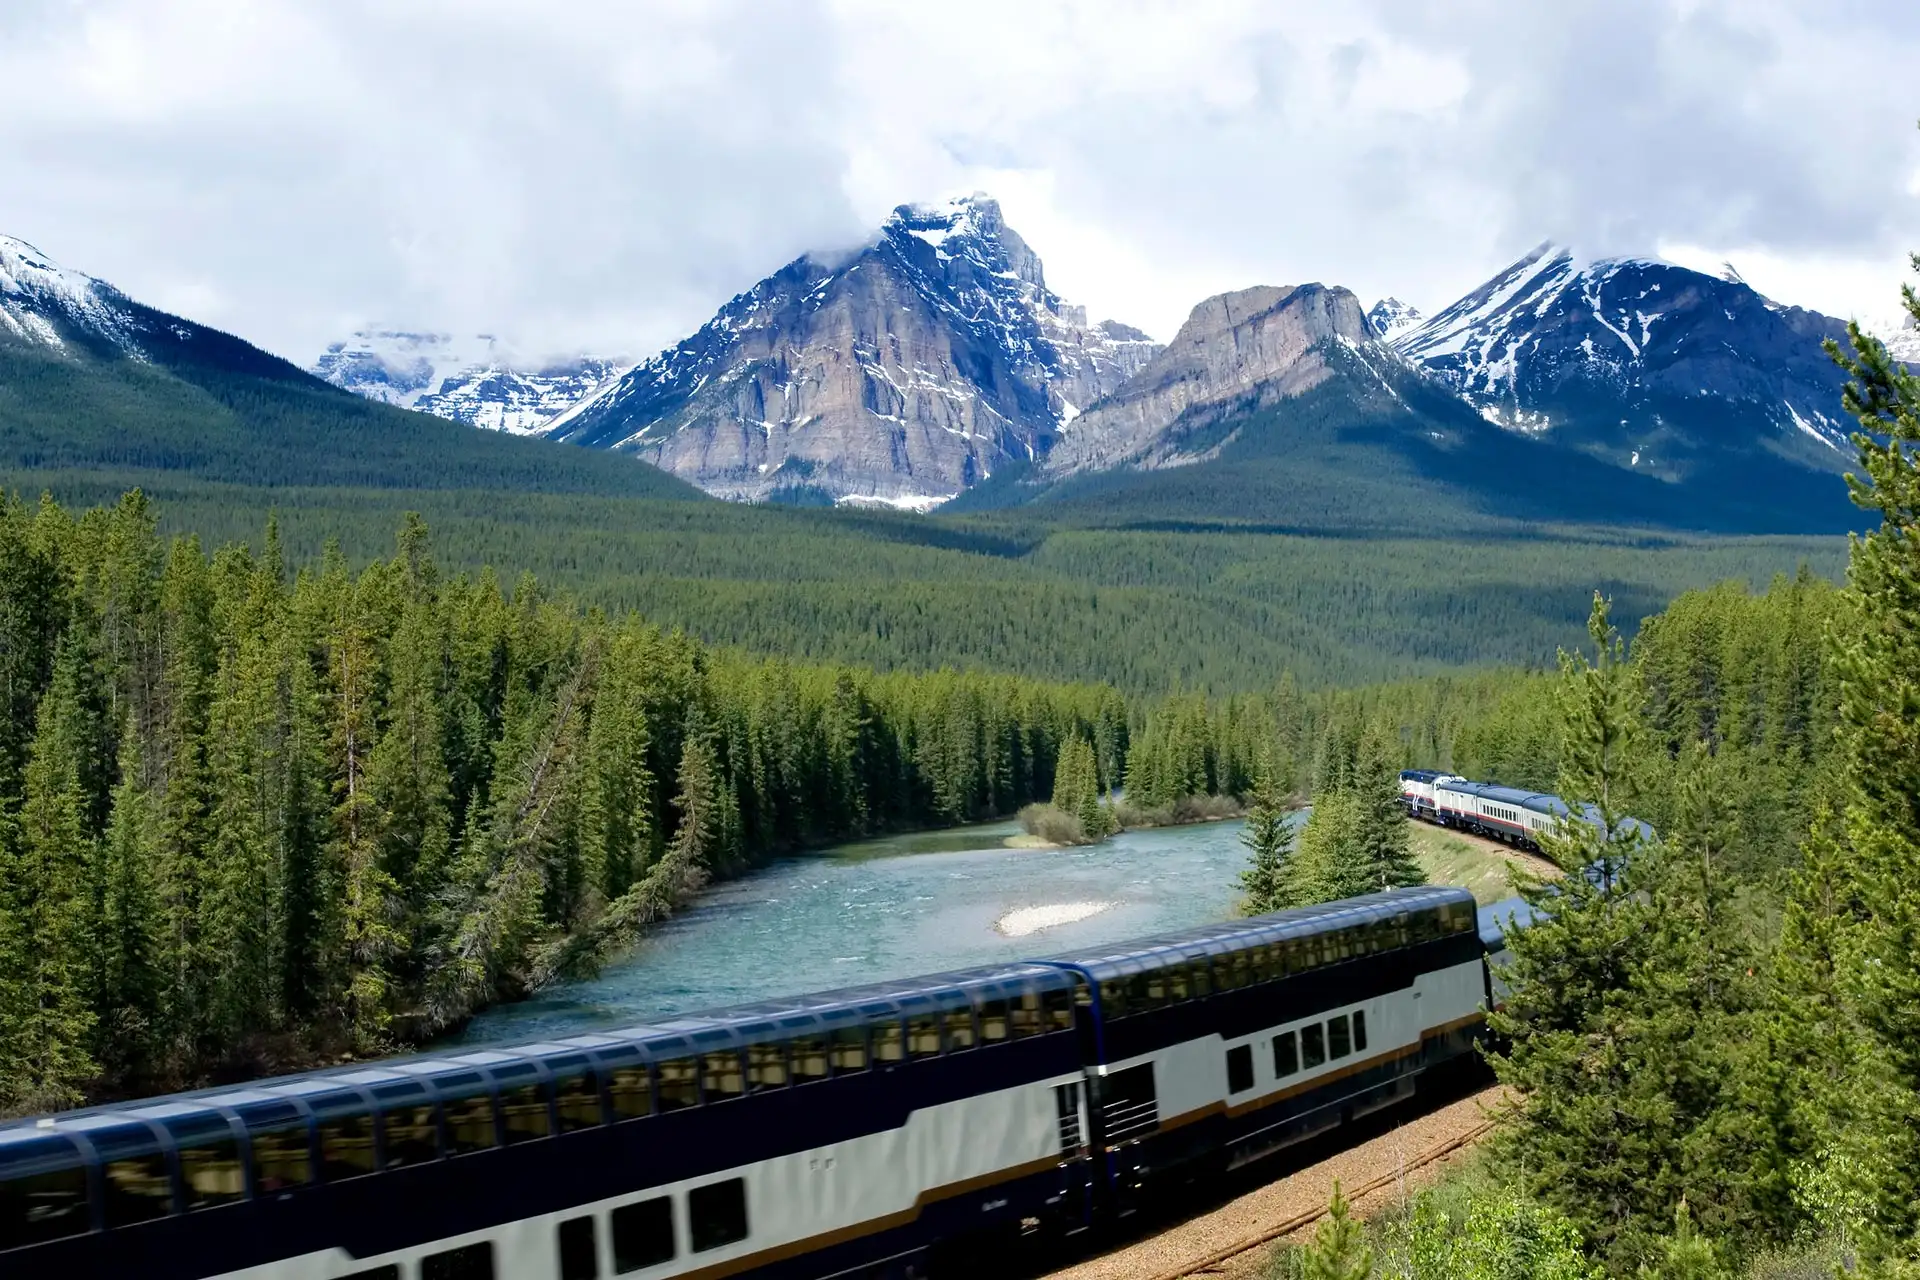 A train in the Canadian Rockies